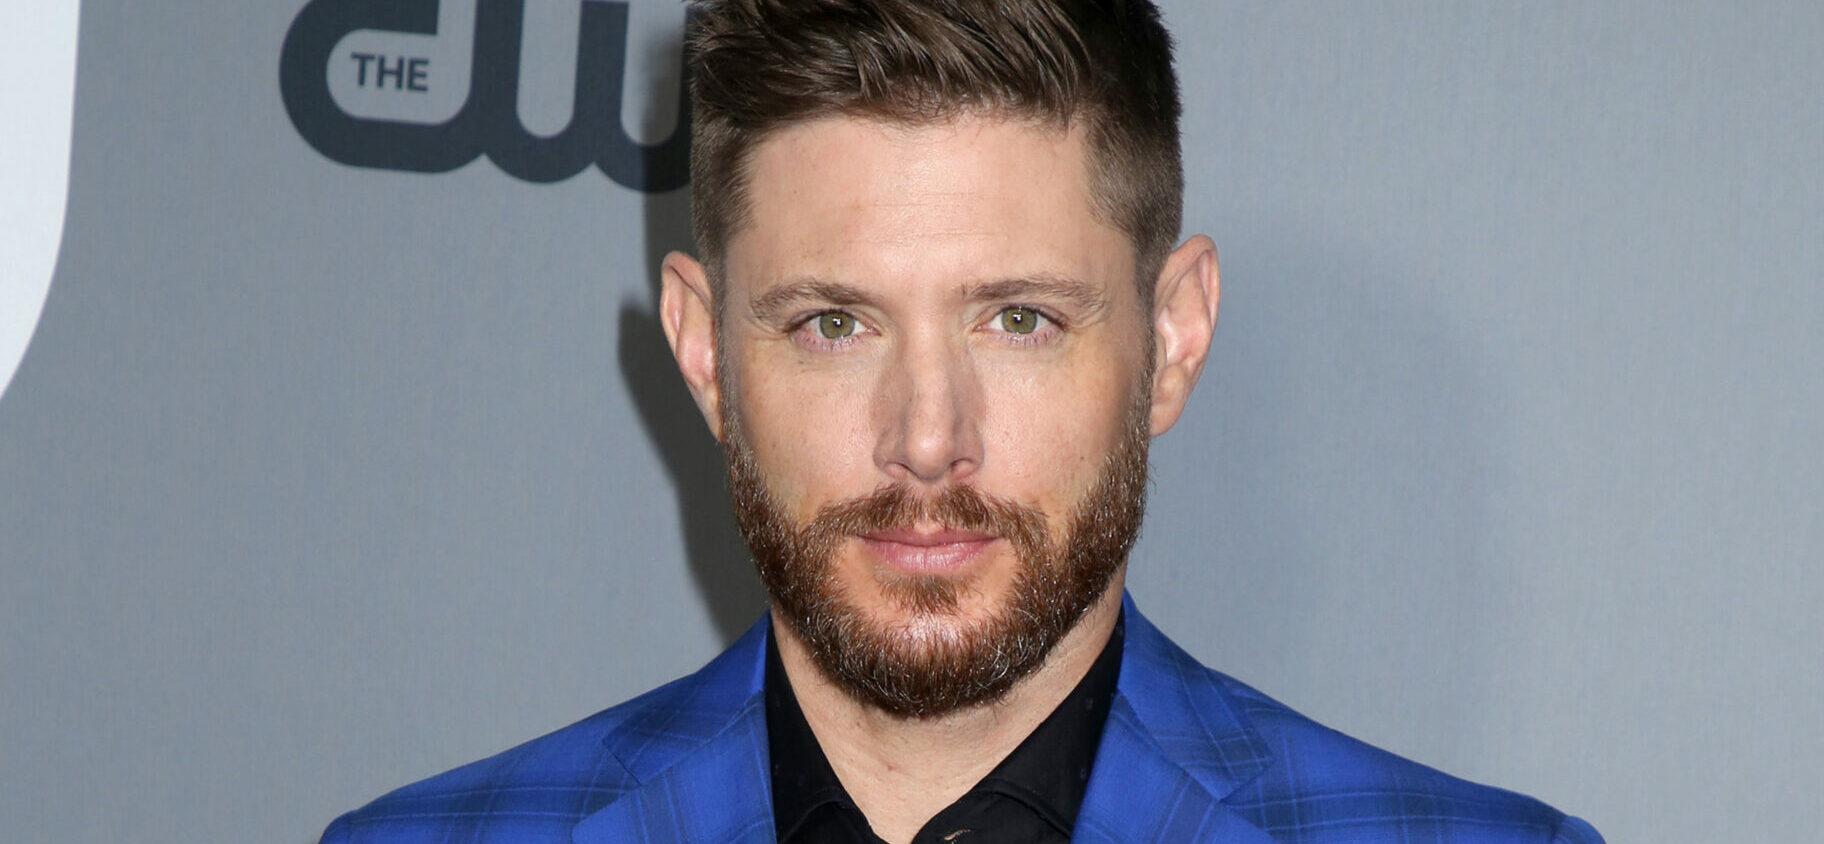 Jensen Ackles Named In ‘The Winchesters’ Lawsuit Over Set Safety